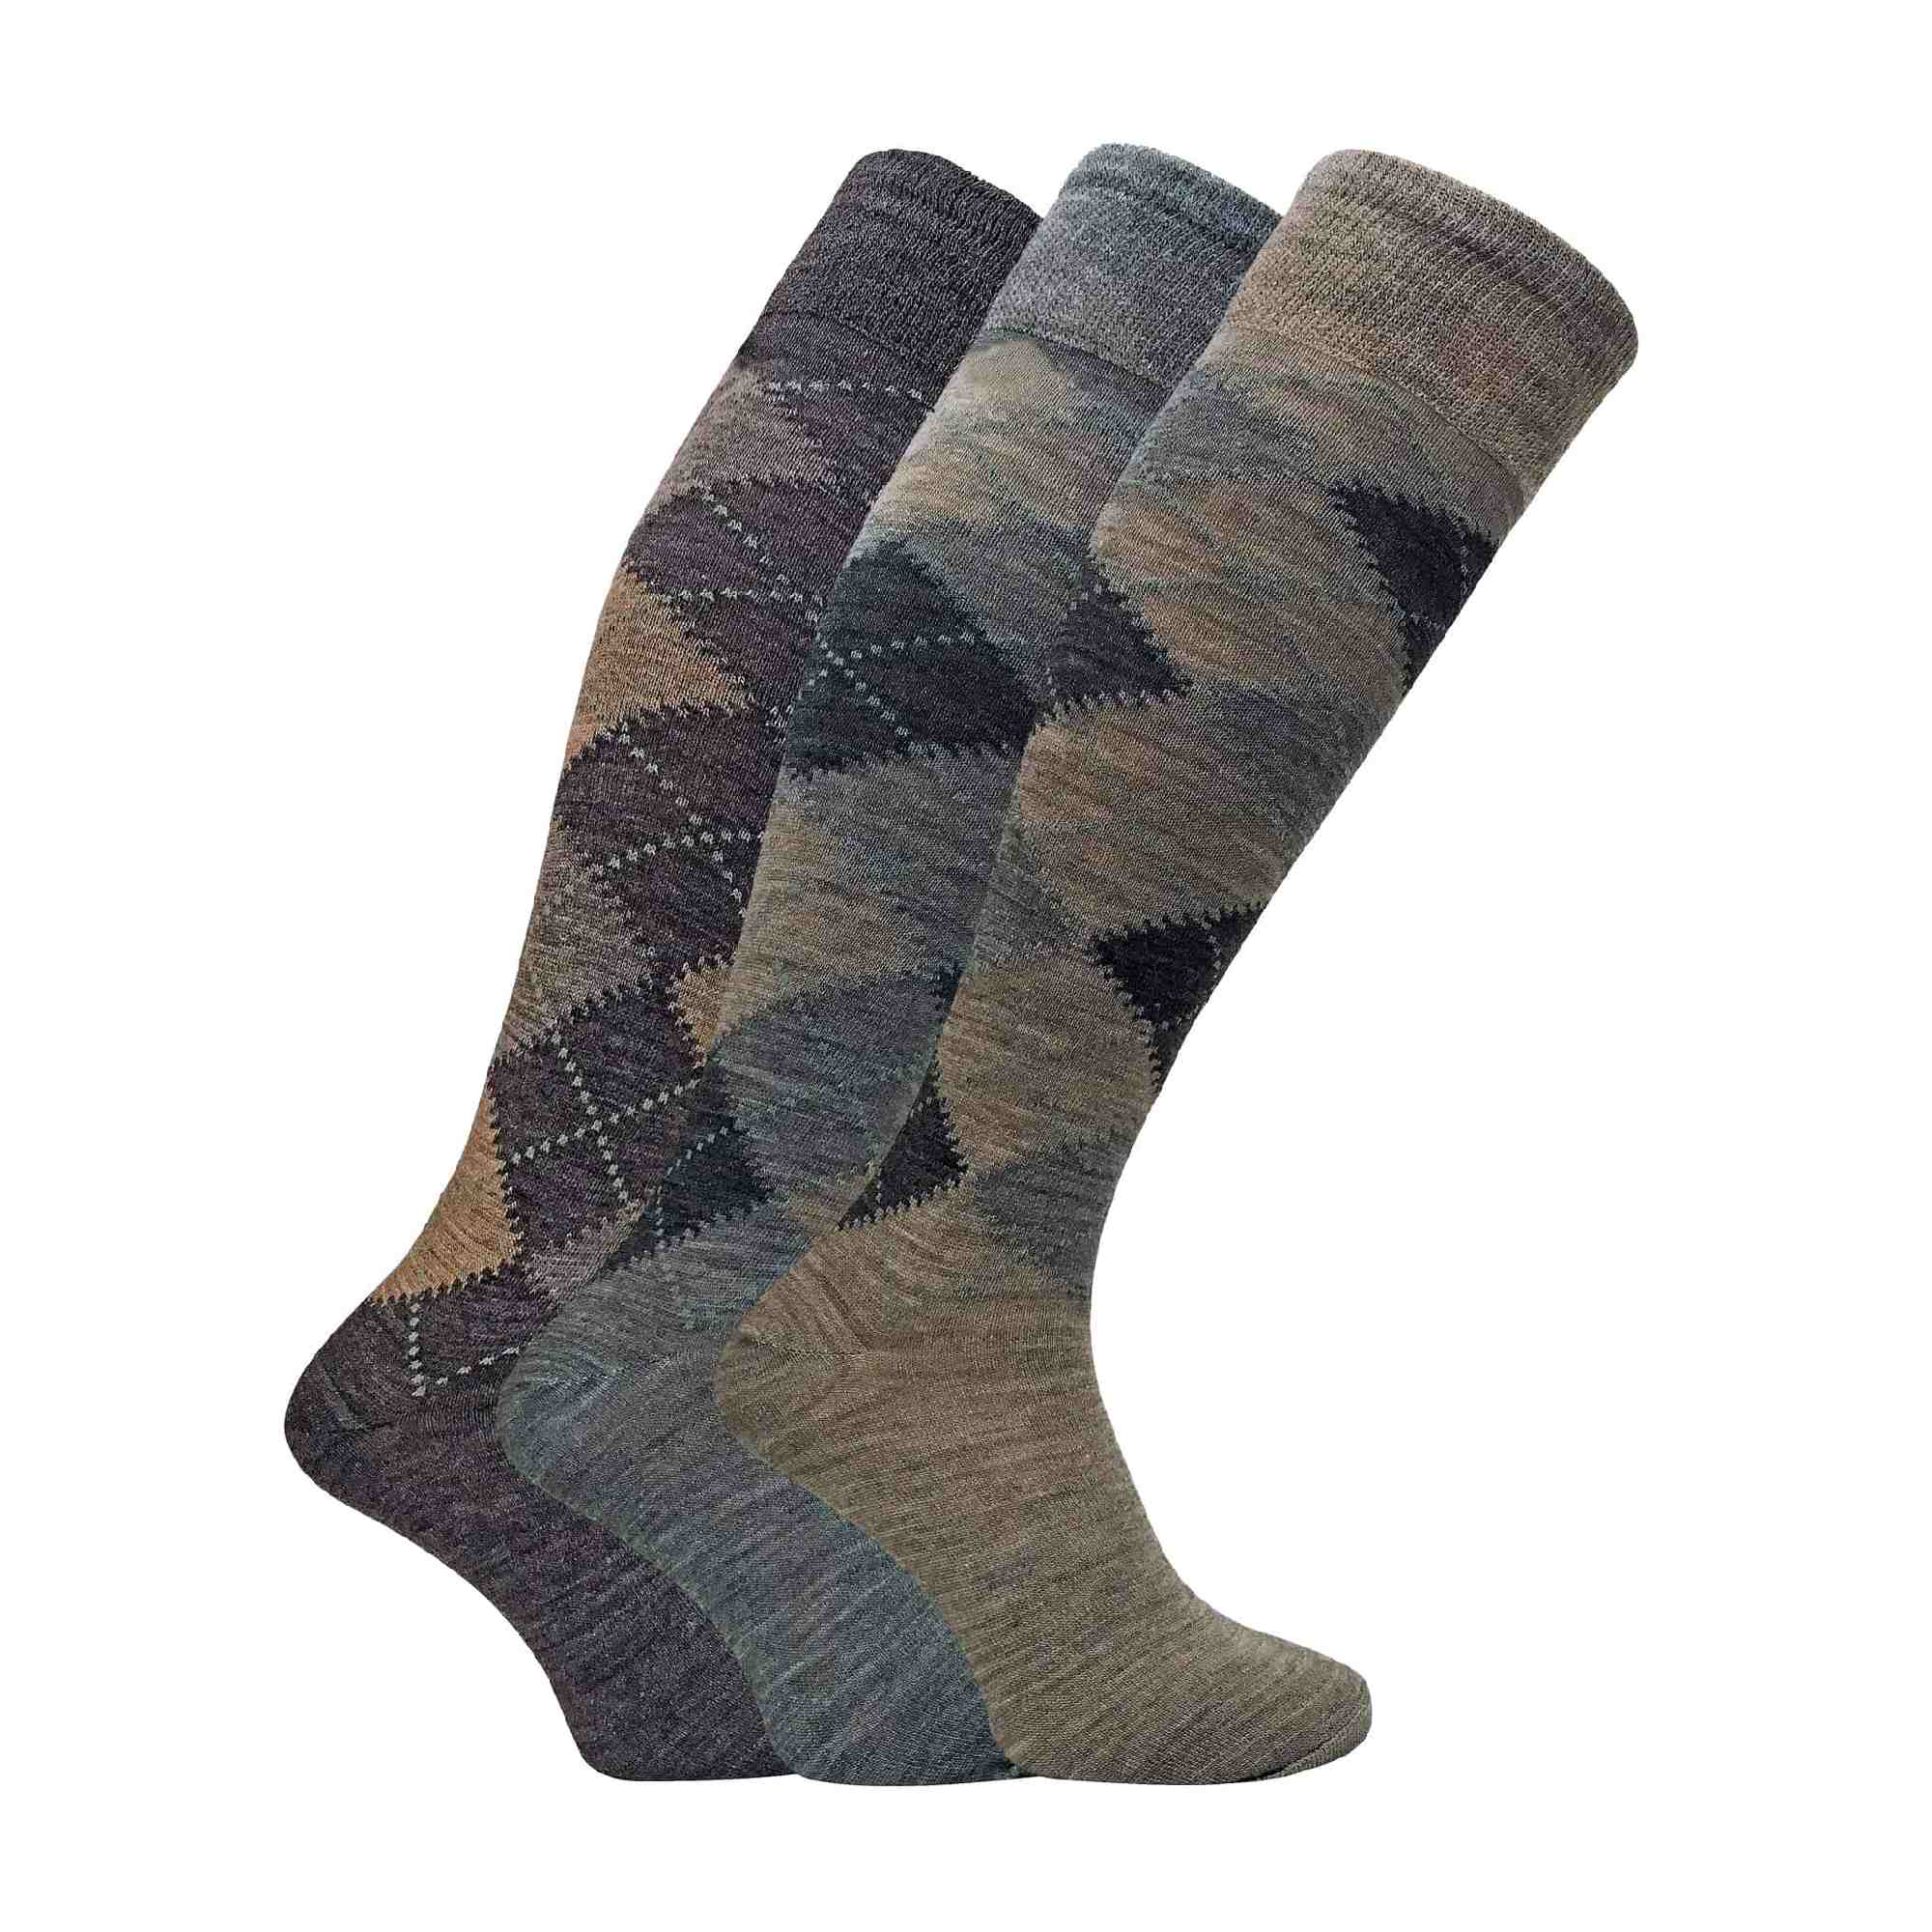 ARKYLE Socks for Men Woolen Thermal Socks Calf Length Thick Terry Winter  Wear Socks, Free Size, multicolored, Pack of 4 Pairs